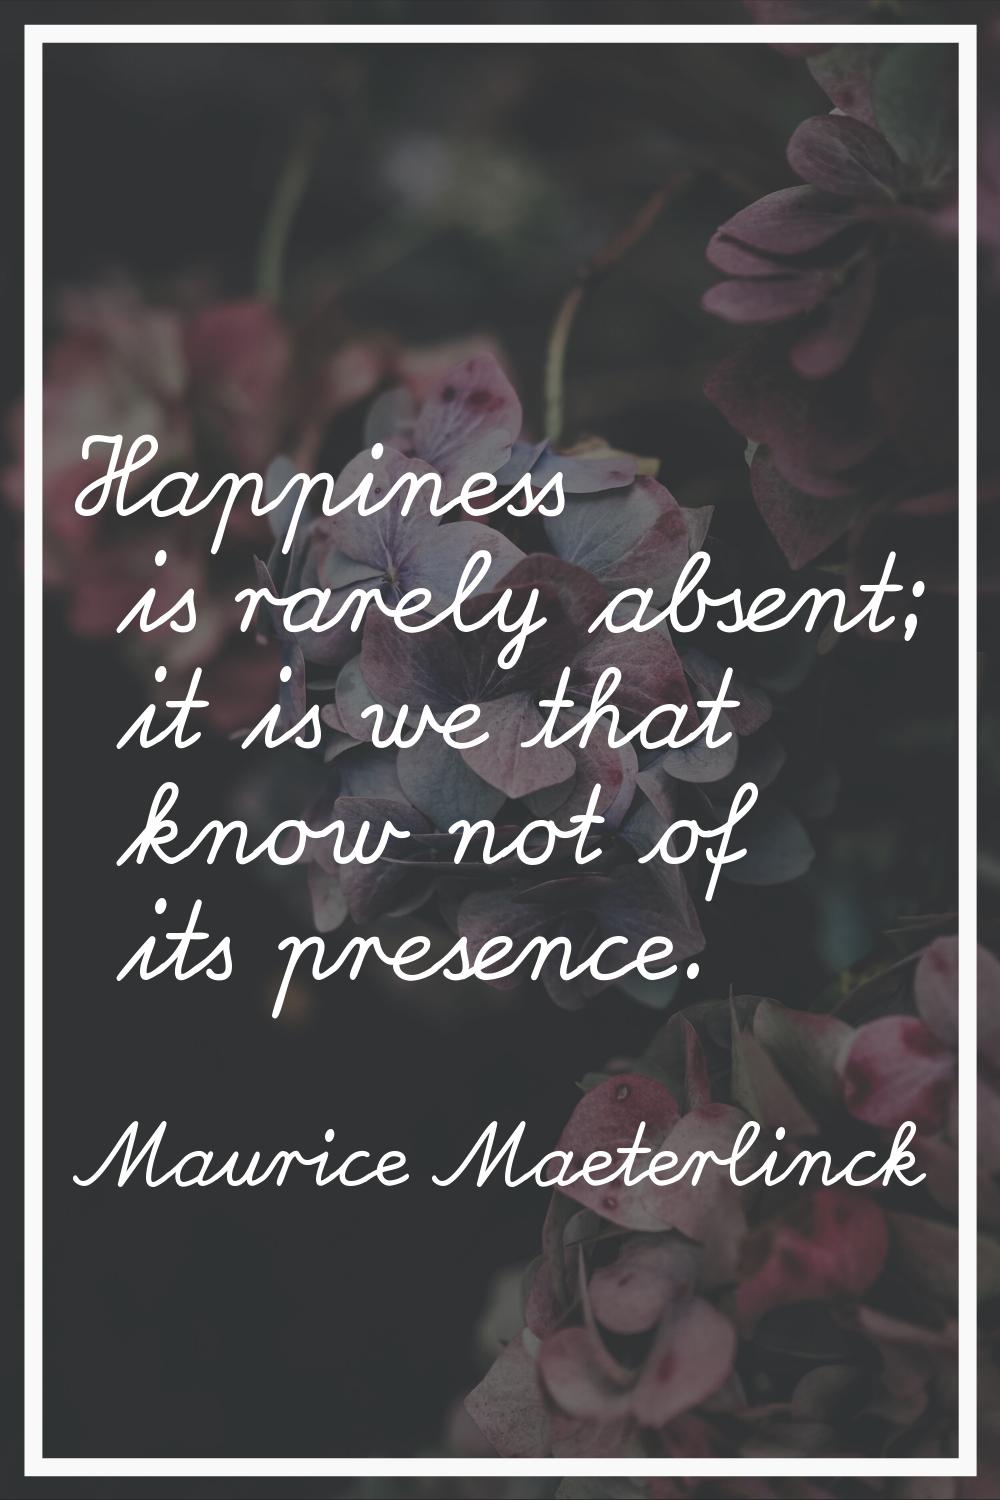 Happiness is rarely absent; it is we that know not of its presence.